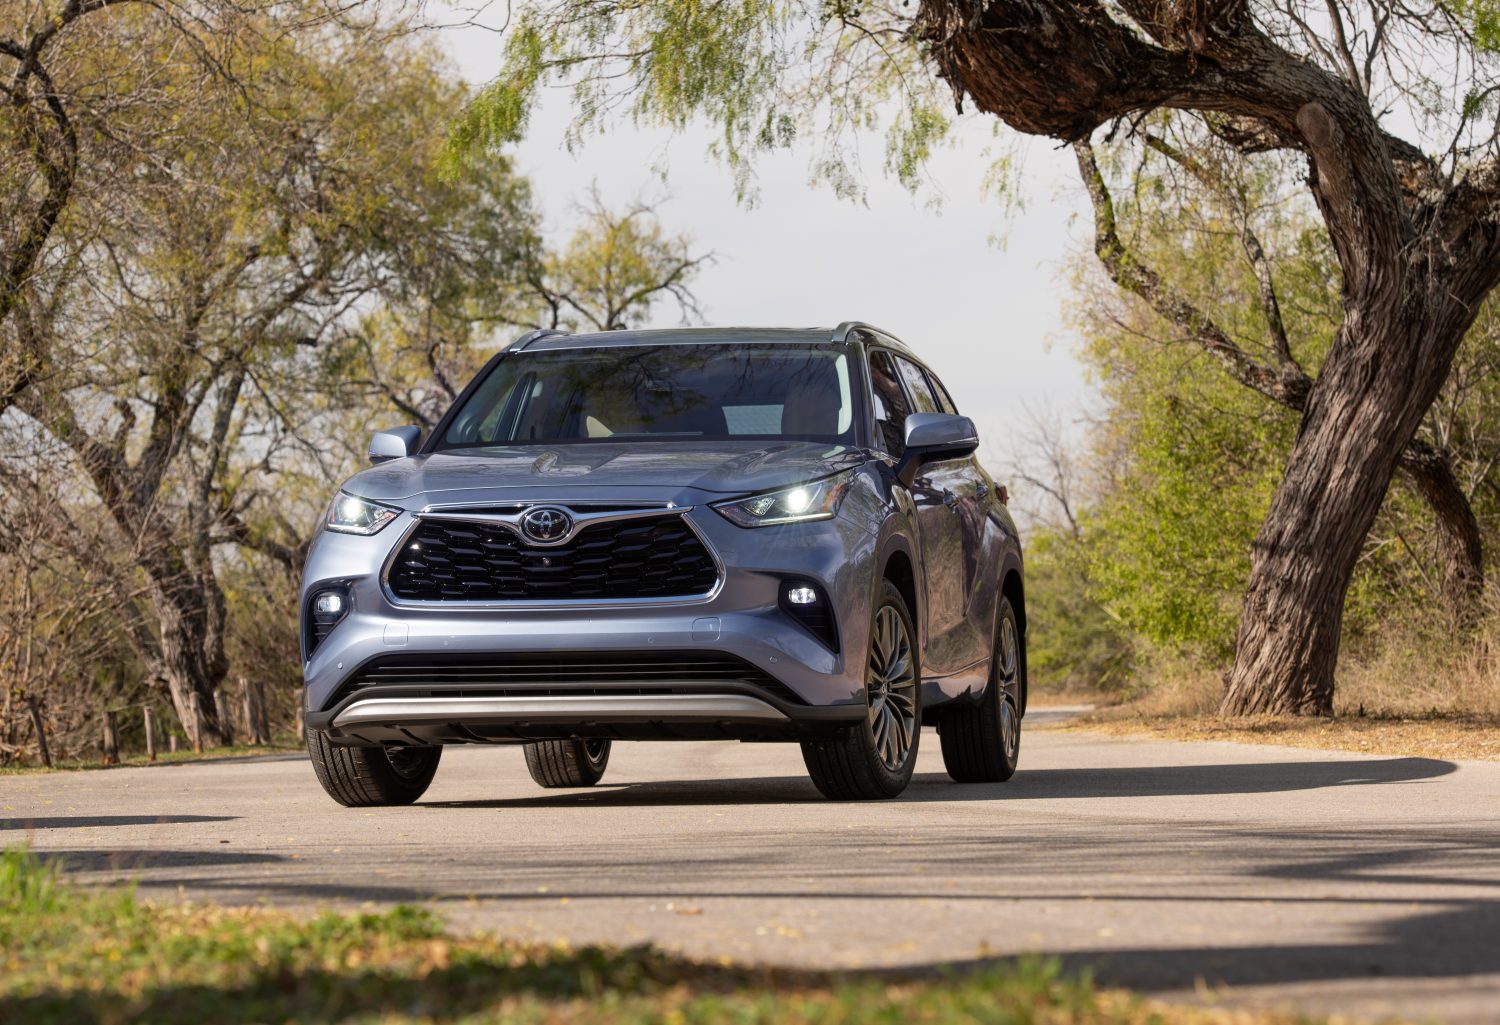 Blue-gray 2022 Toyota Highlander parked on a road